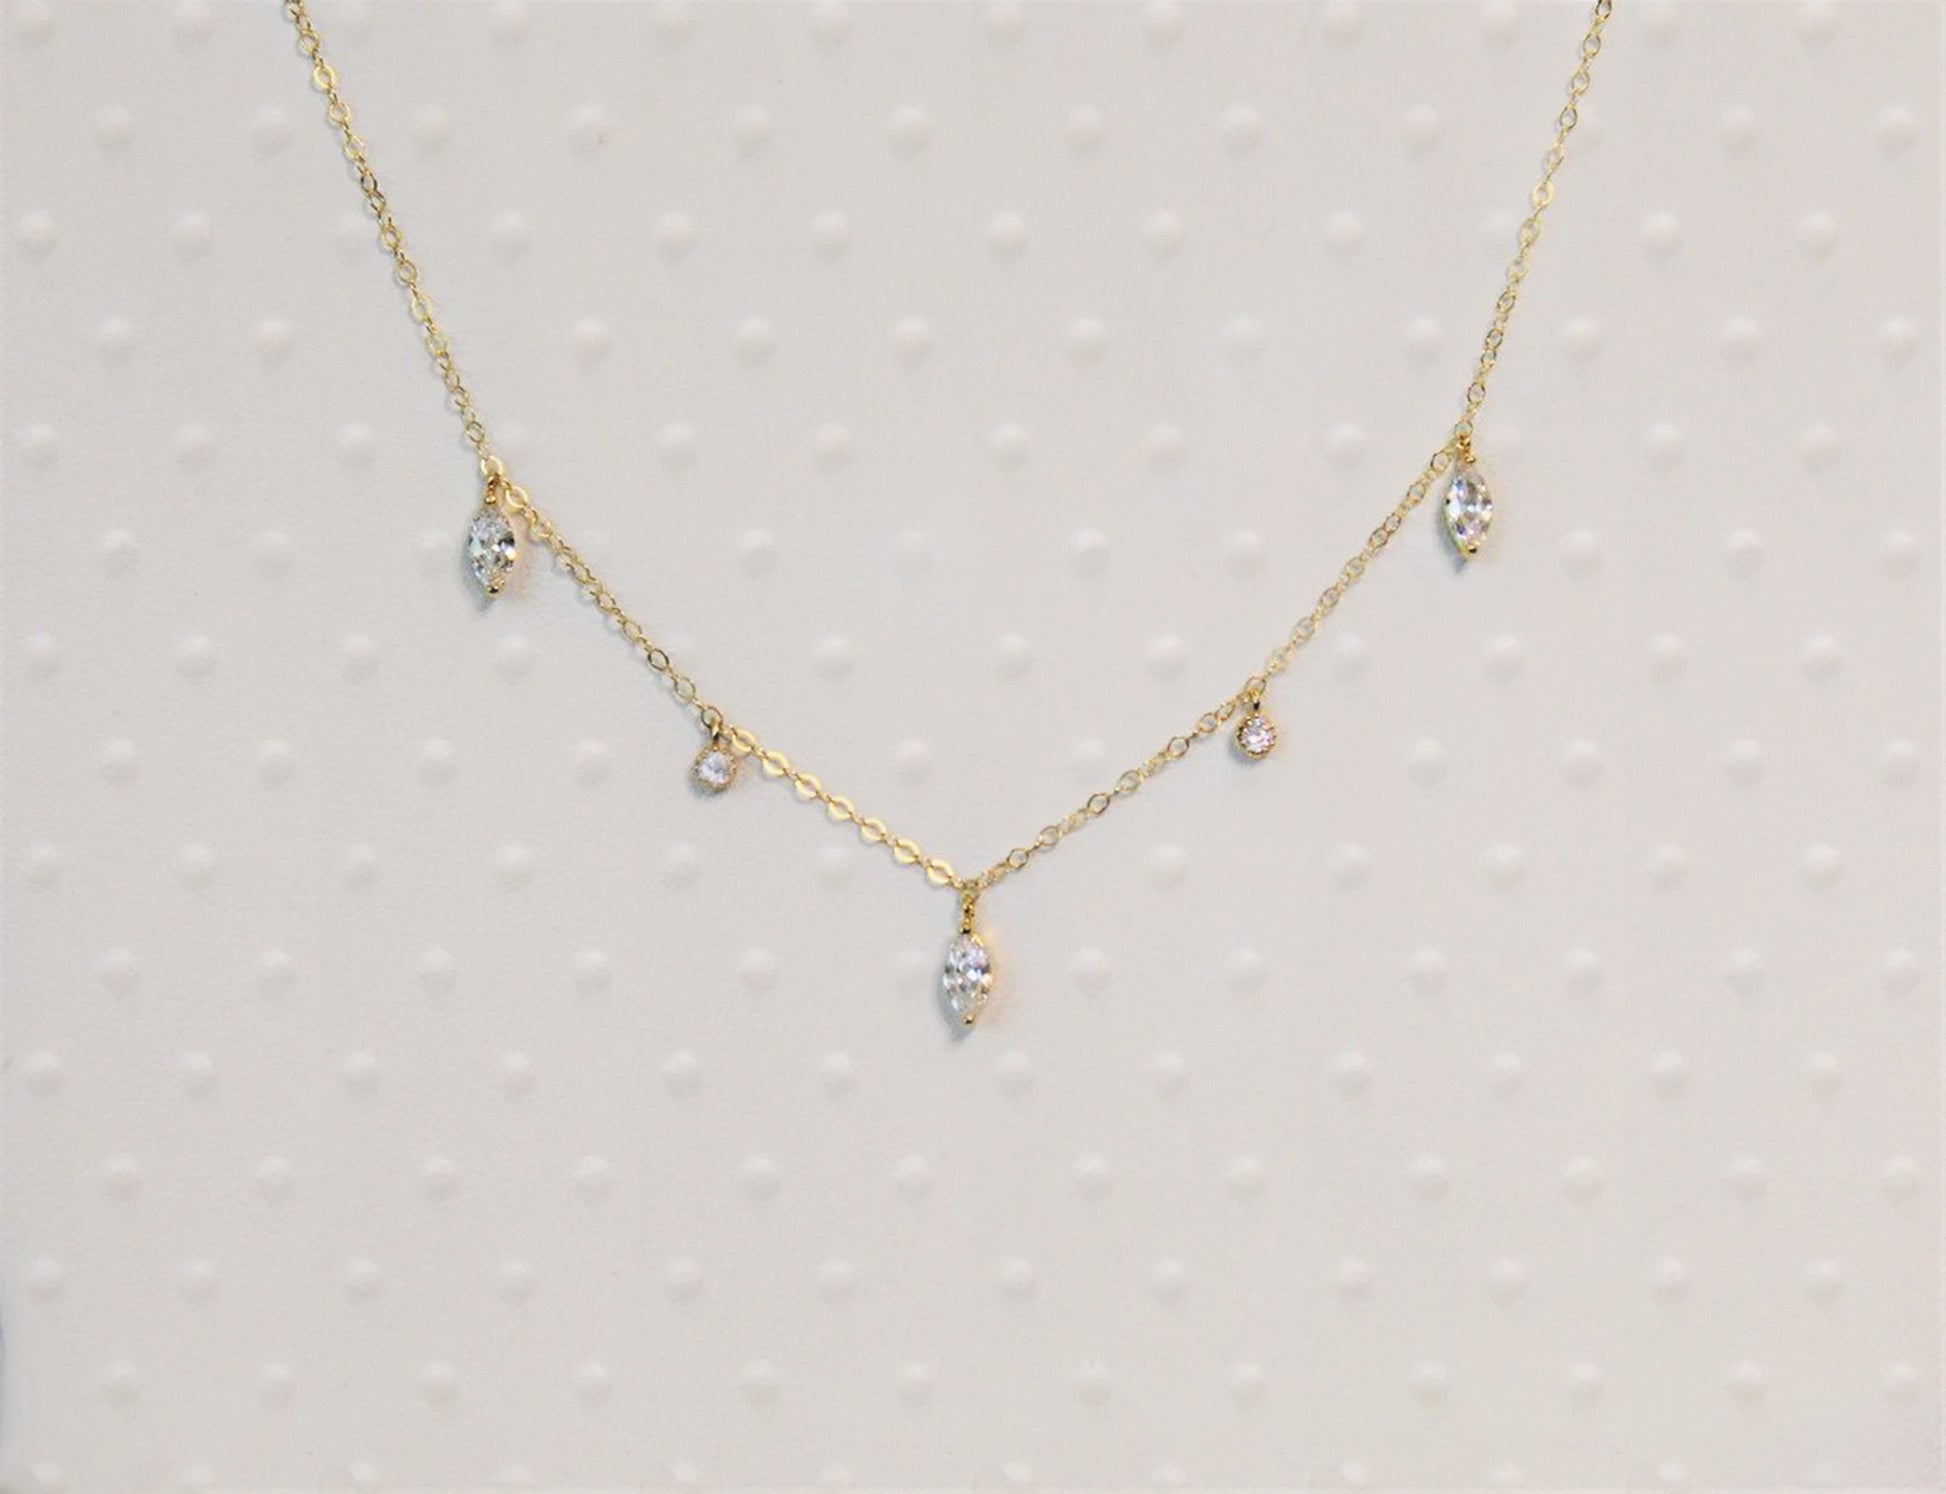 Gold filled cable chain necklace with marquise cut diamonds and round cut diamonds is shown against a textured white background.